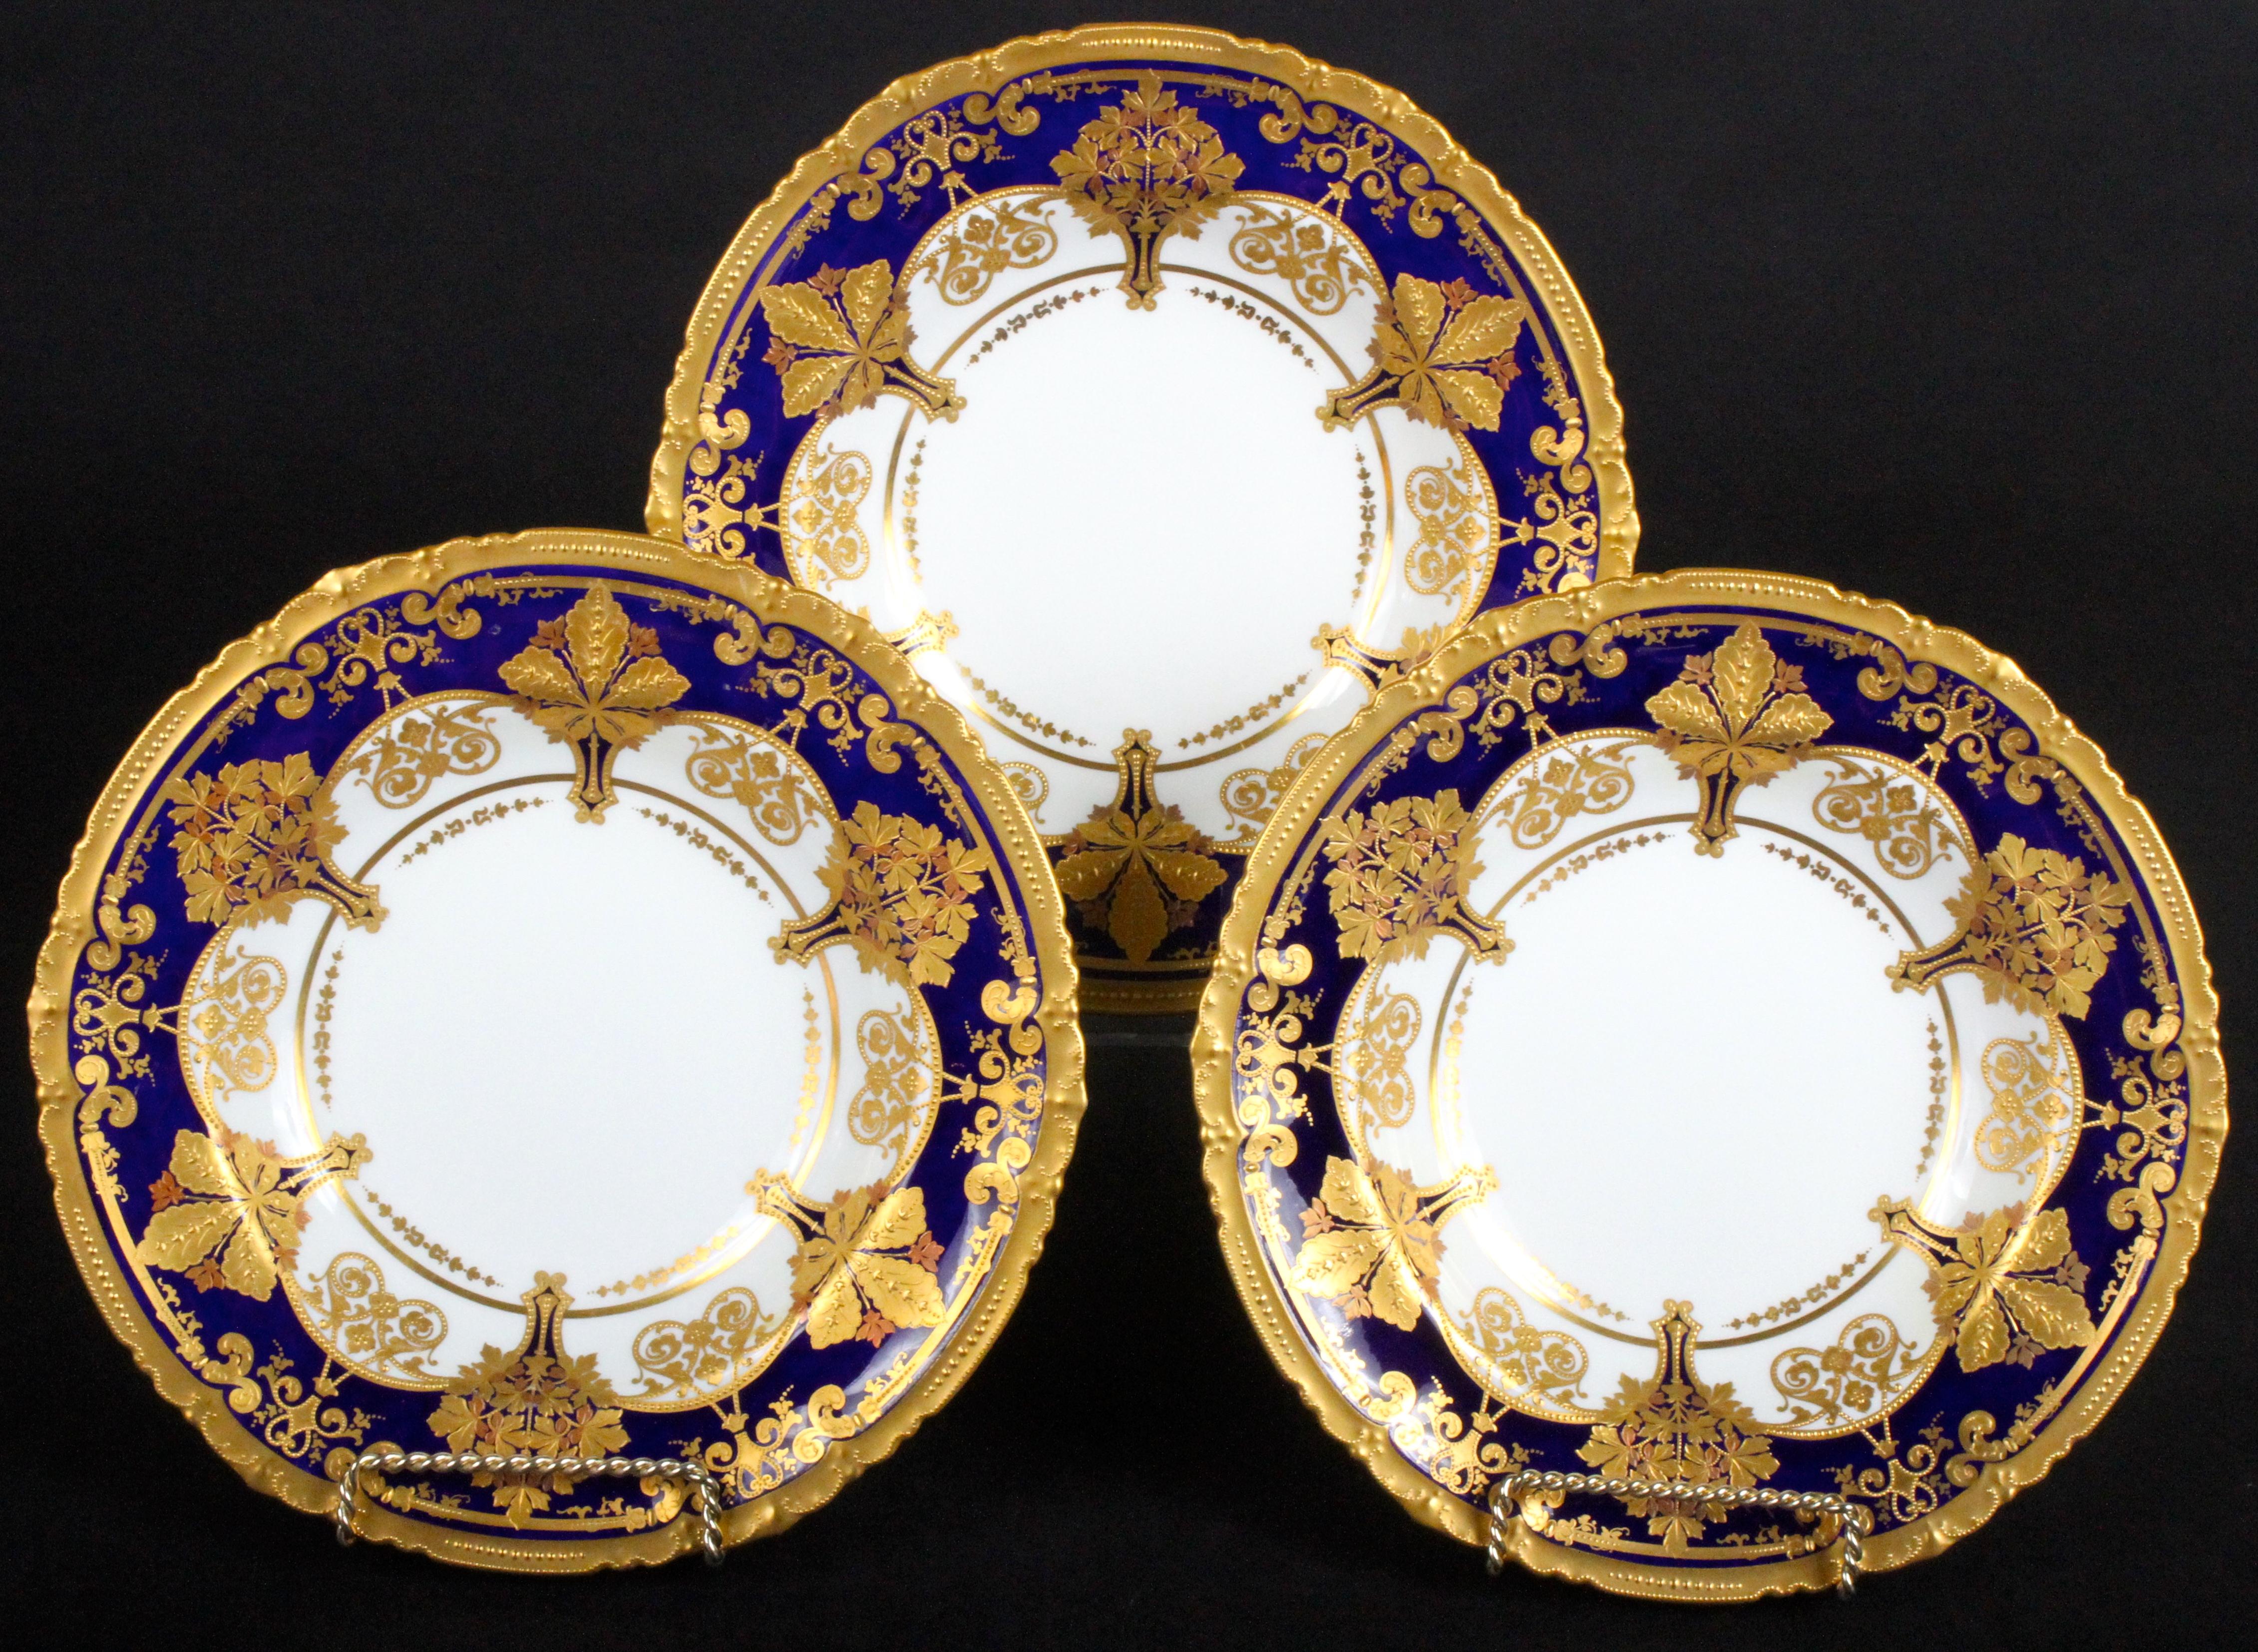 These 12 ornate soup plates are from the esteemed Royal Crown Derby firm of Derby, England. The soup plates' cobalt rim features 6 ornaments of 2 different designs, both composed of a variety of leaves in yellow and rose gold, the soup plates are